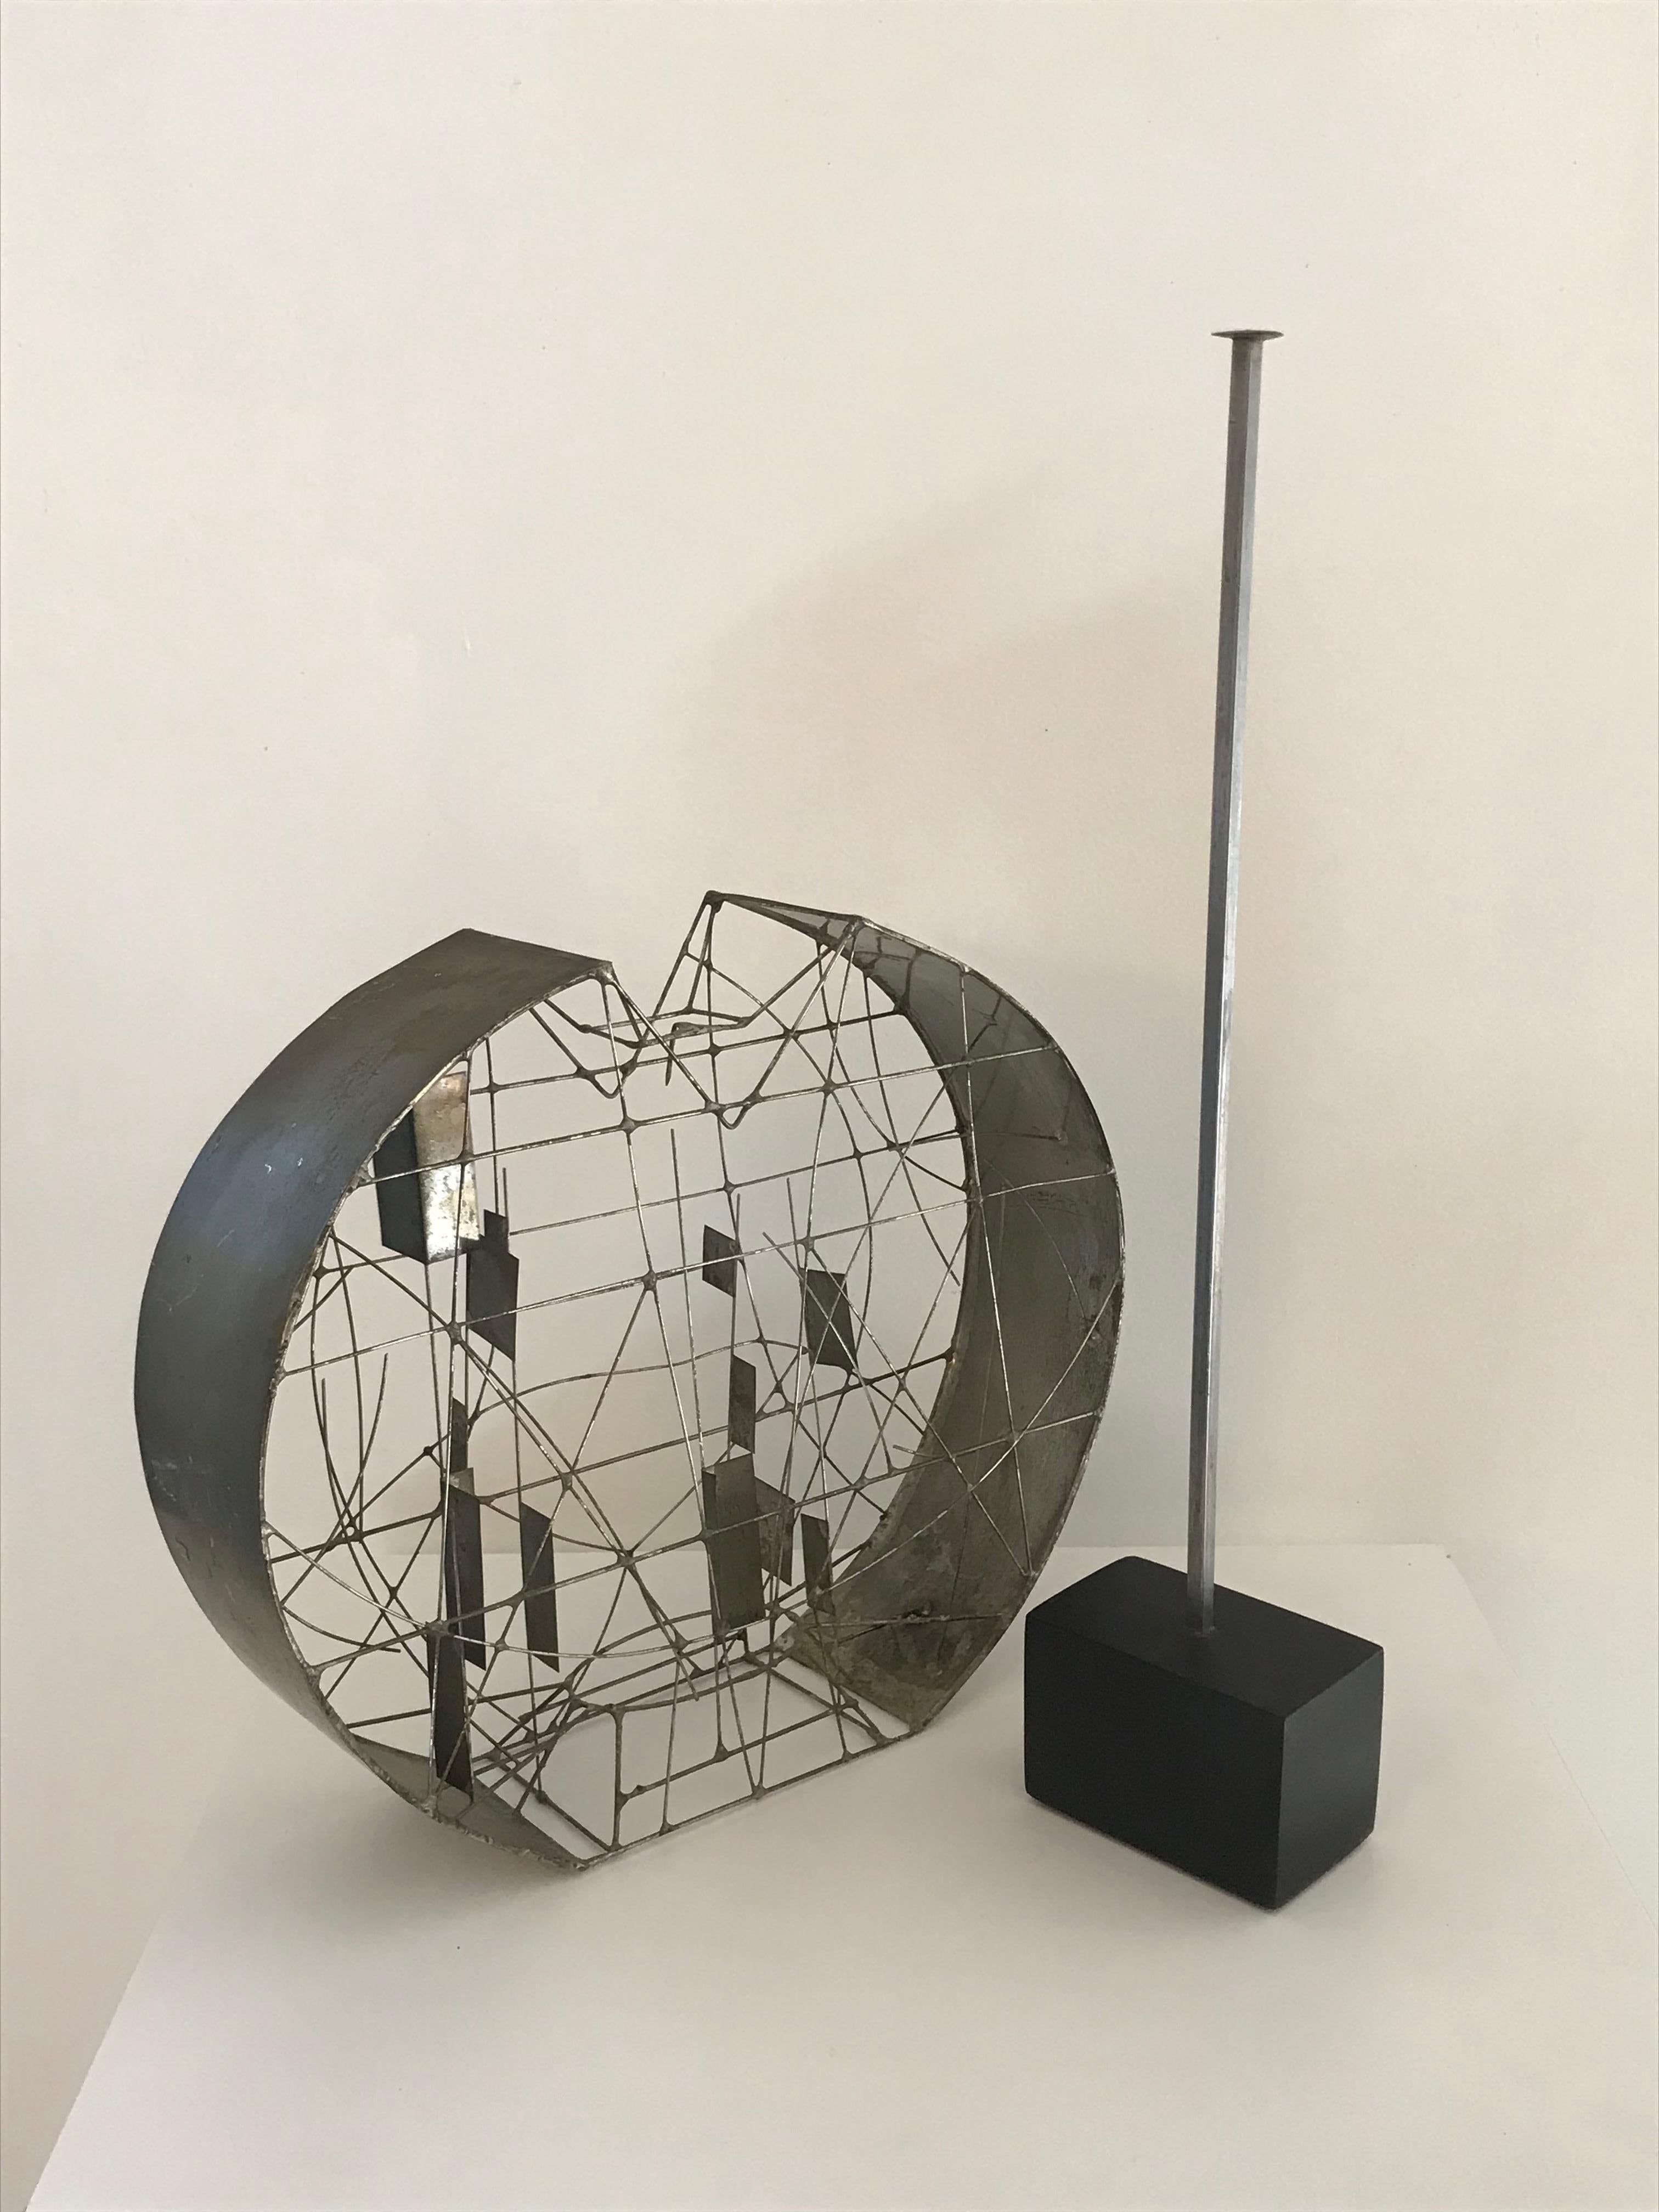 kinetic or mobile sculpture